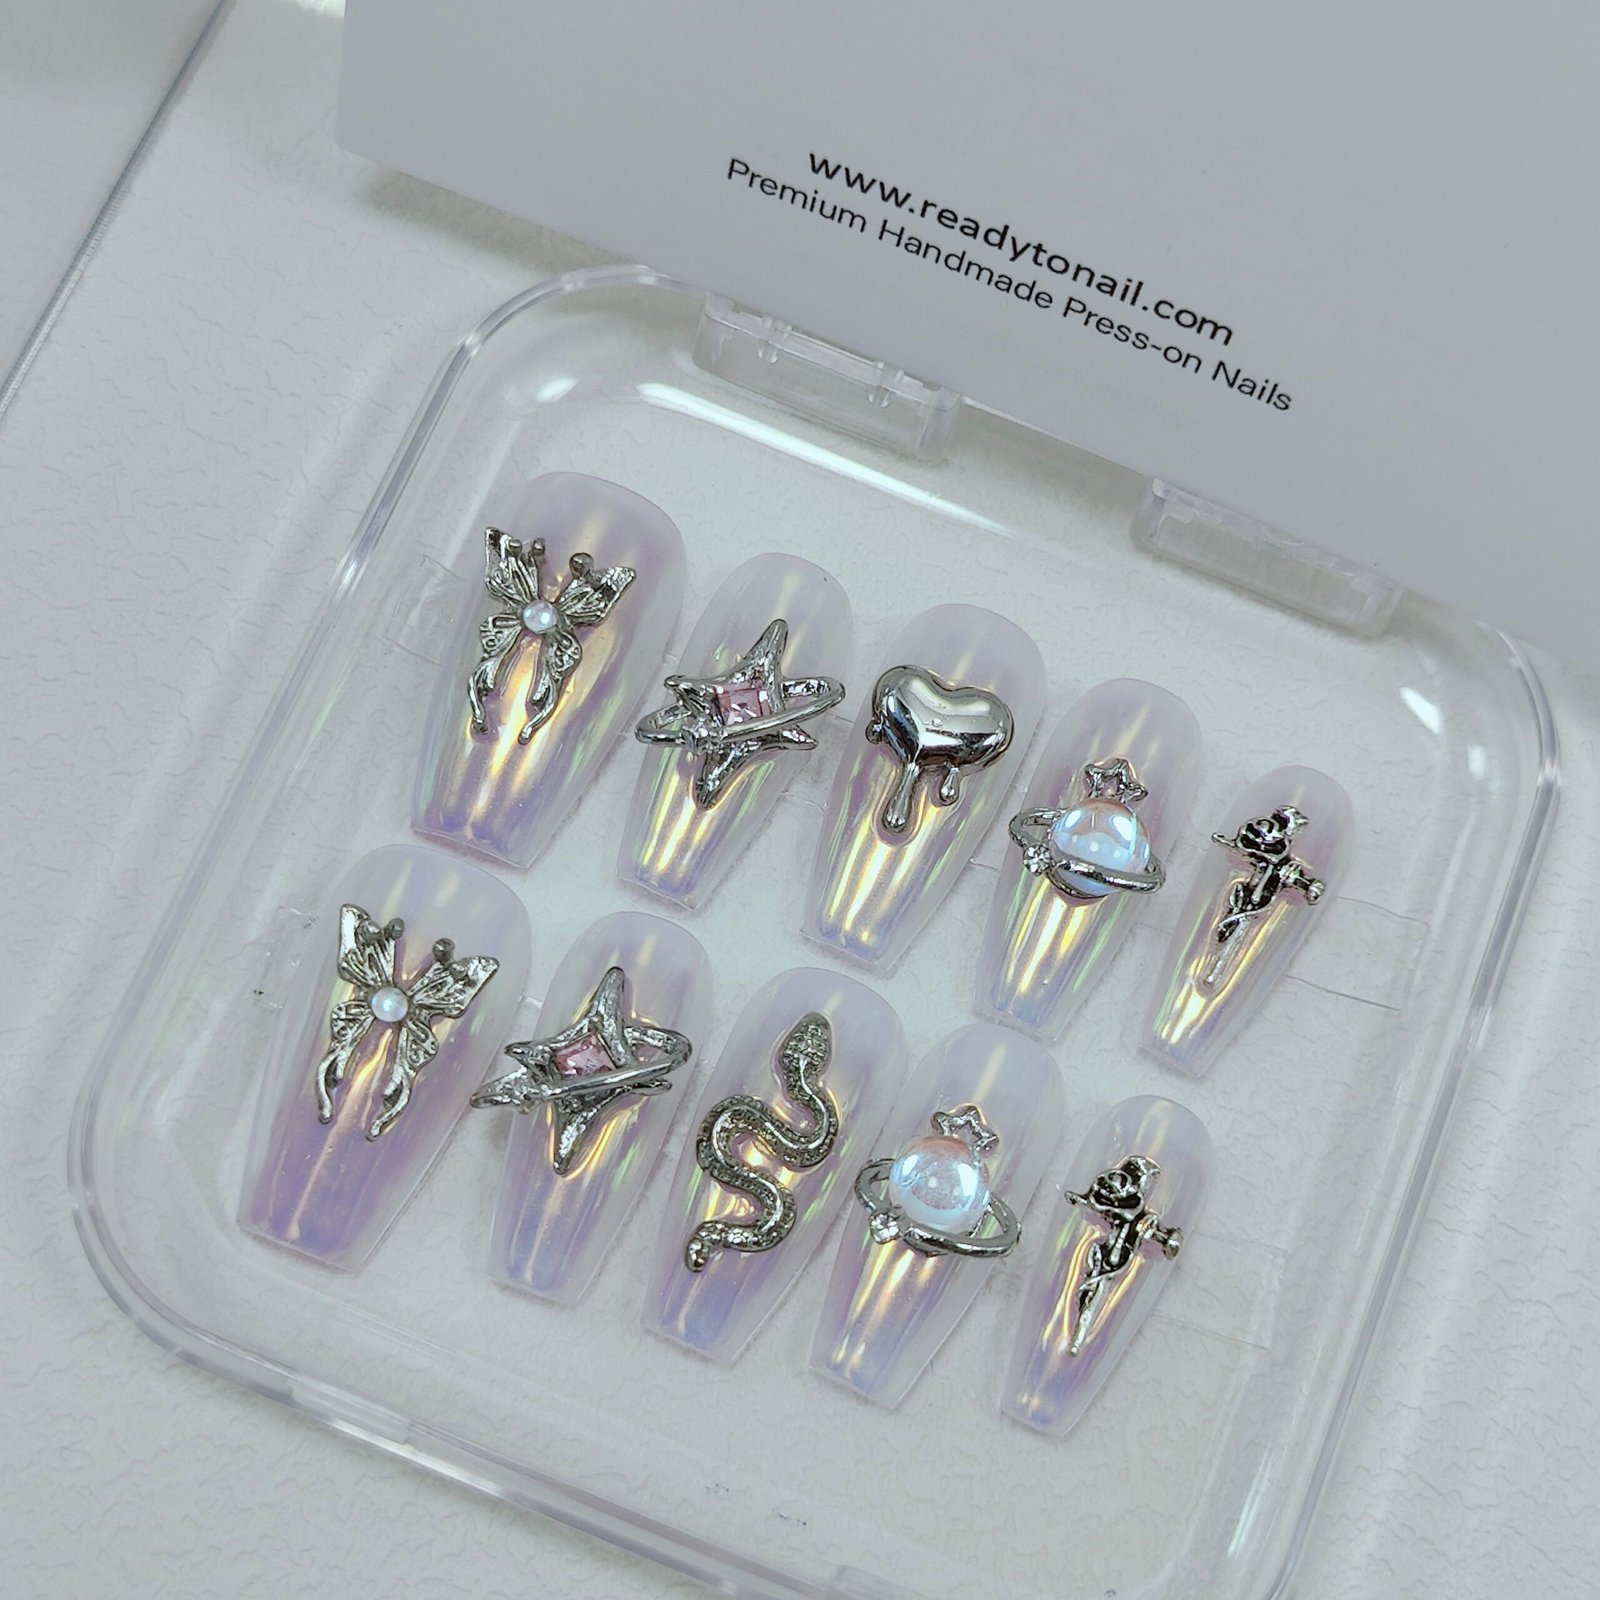 Pearl Chrome Charms Nails | White Purple Holographic Mirror Nail Extensions | Handmade 3D charms Coffin Press on Nails